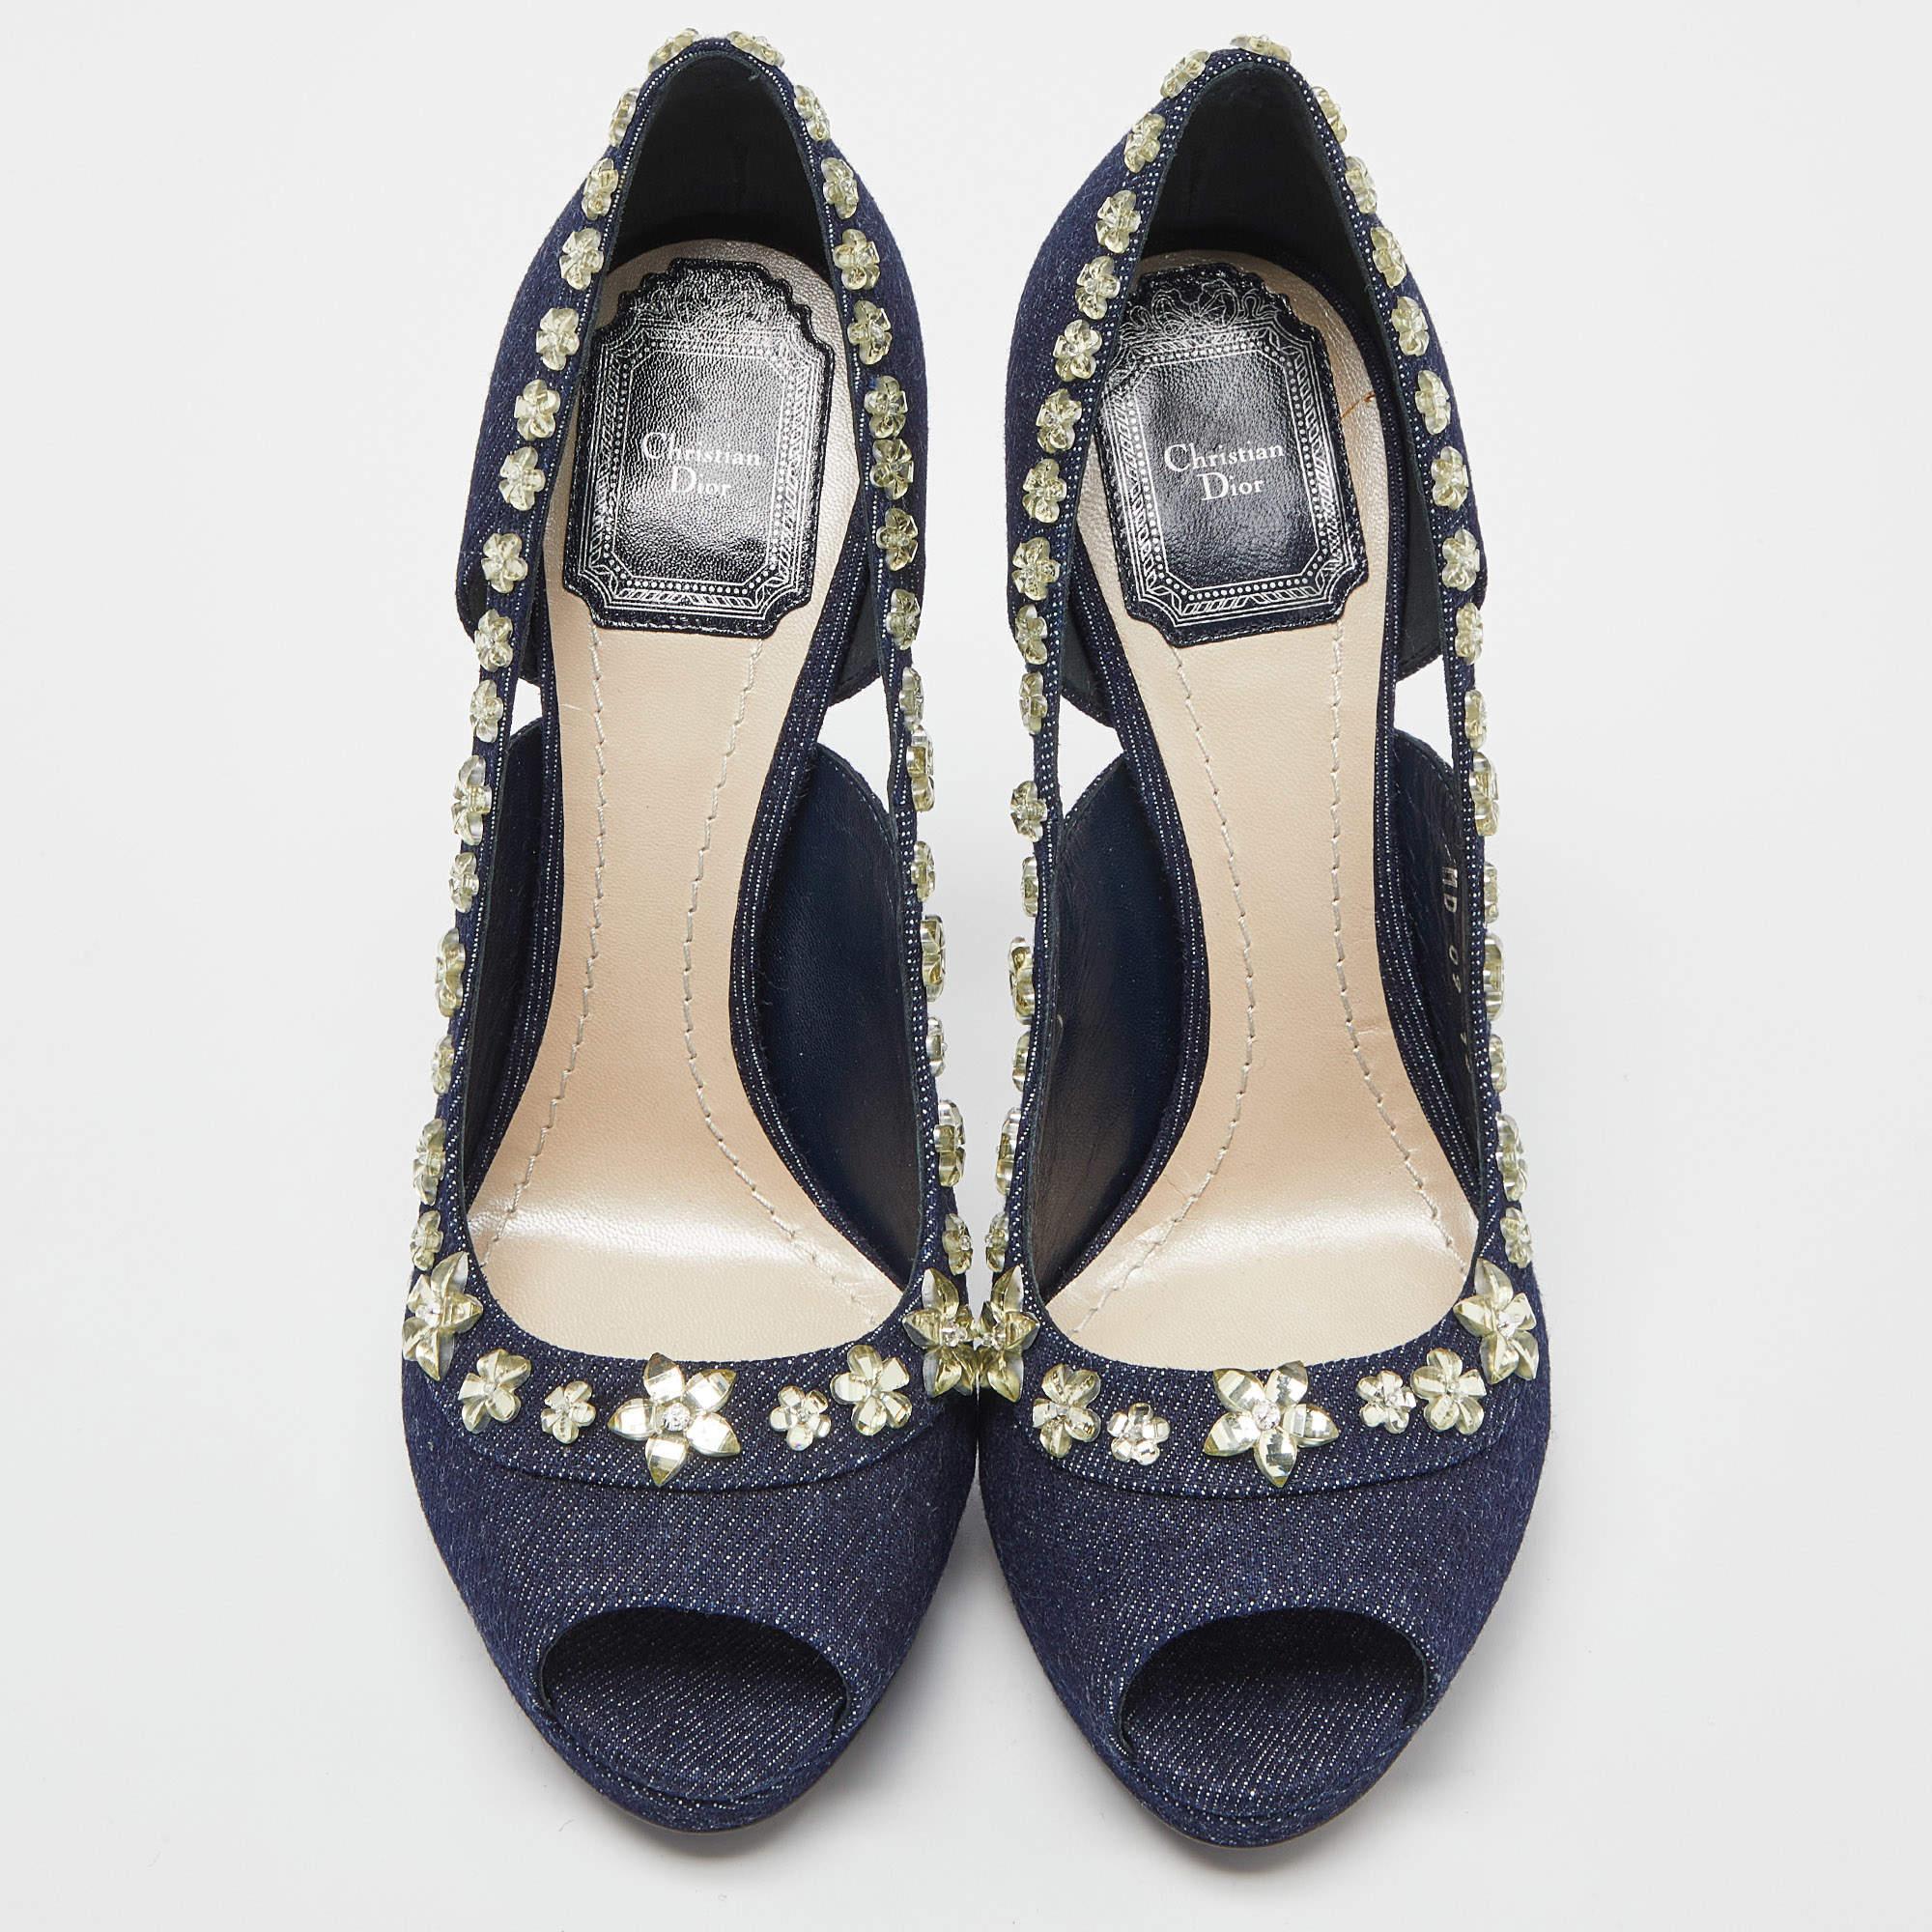 An exclusively design pair for you to help you make a statement! These Dior pumps are crafted from denim and styled with peep-toes. They are decorated with crystal embellishments to resemble a garland and come equipped with comfortable leather-lined